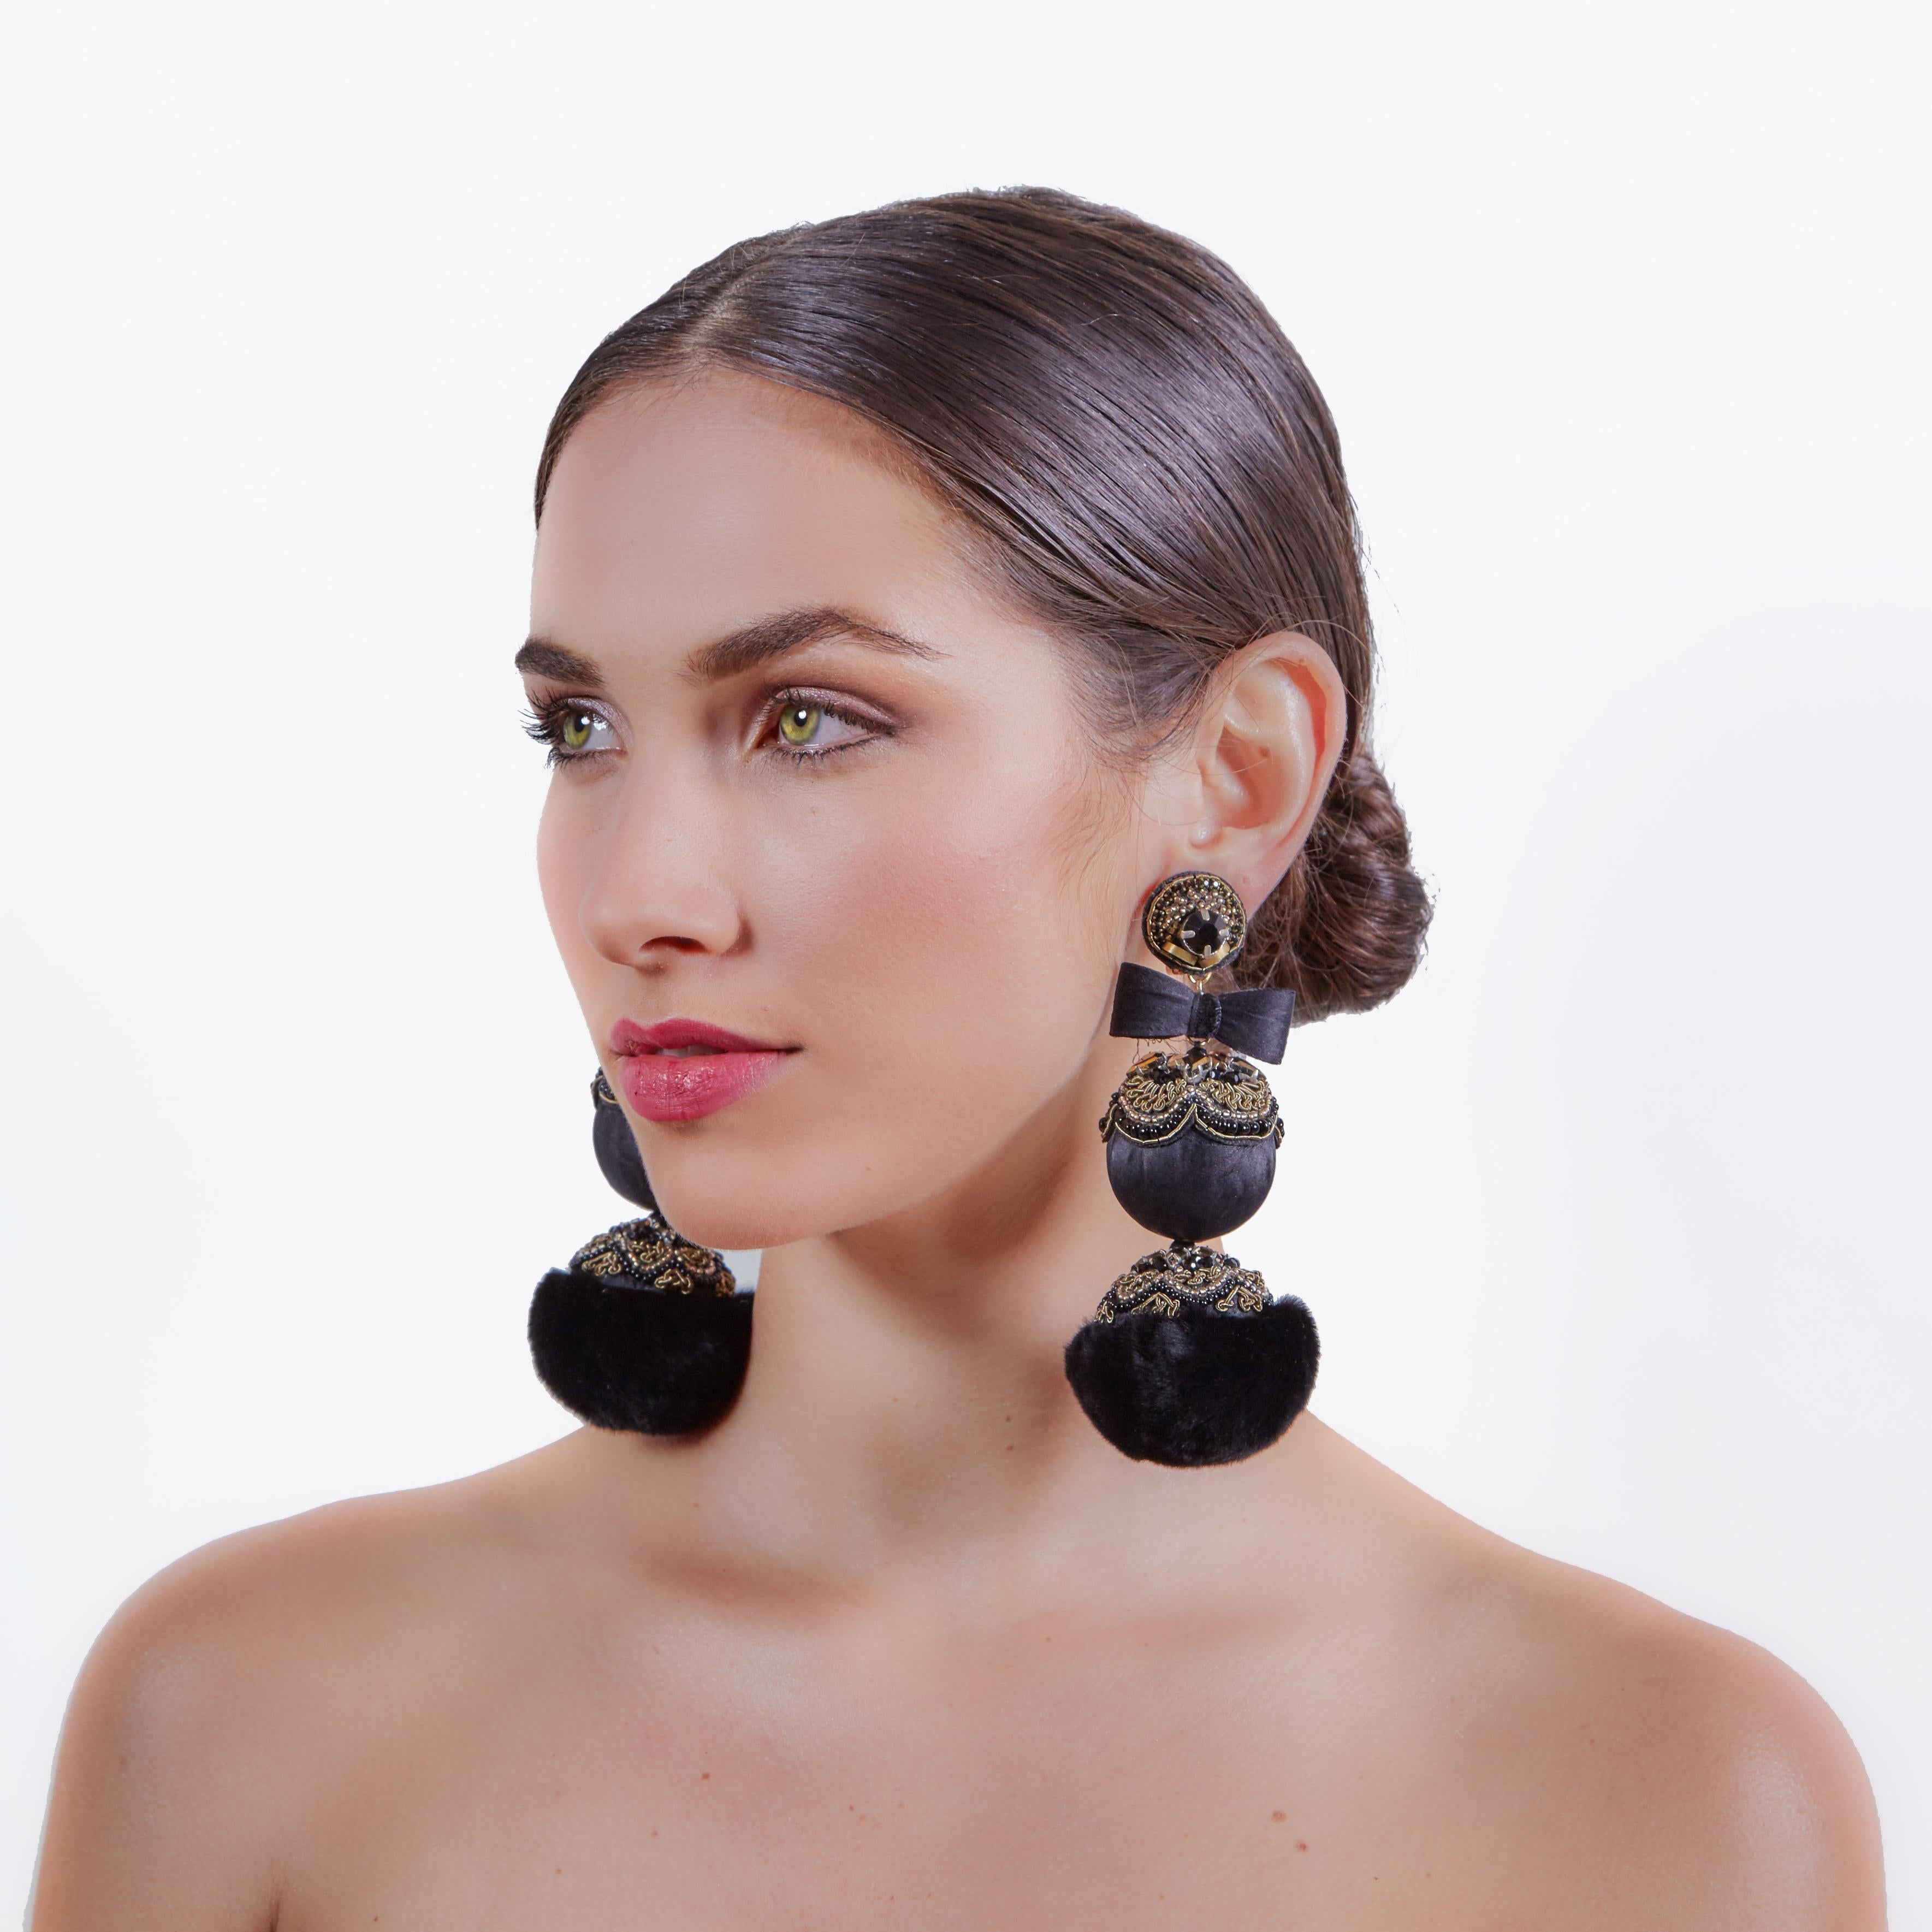 Add an element of dark elegance to your look with the Arpoador earring. Luxurious mink fur pompoms, satin bows, and crystals create an unparalleled level of sophistication.